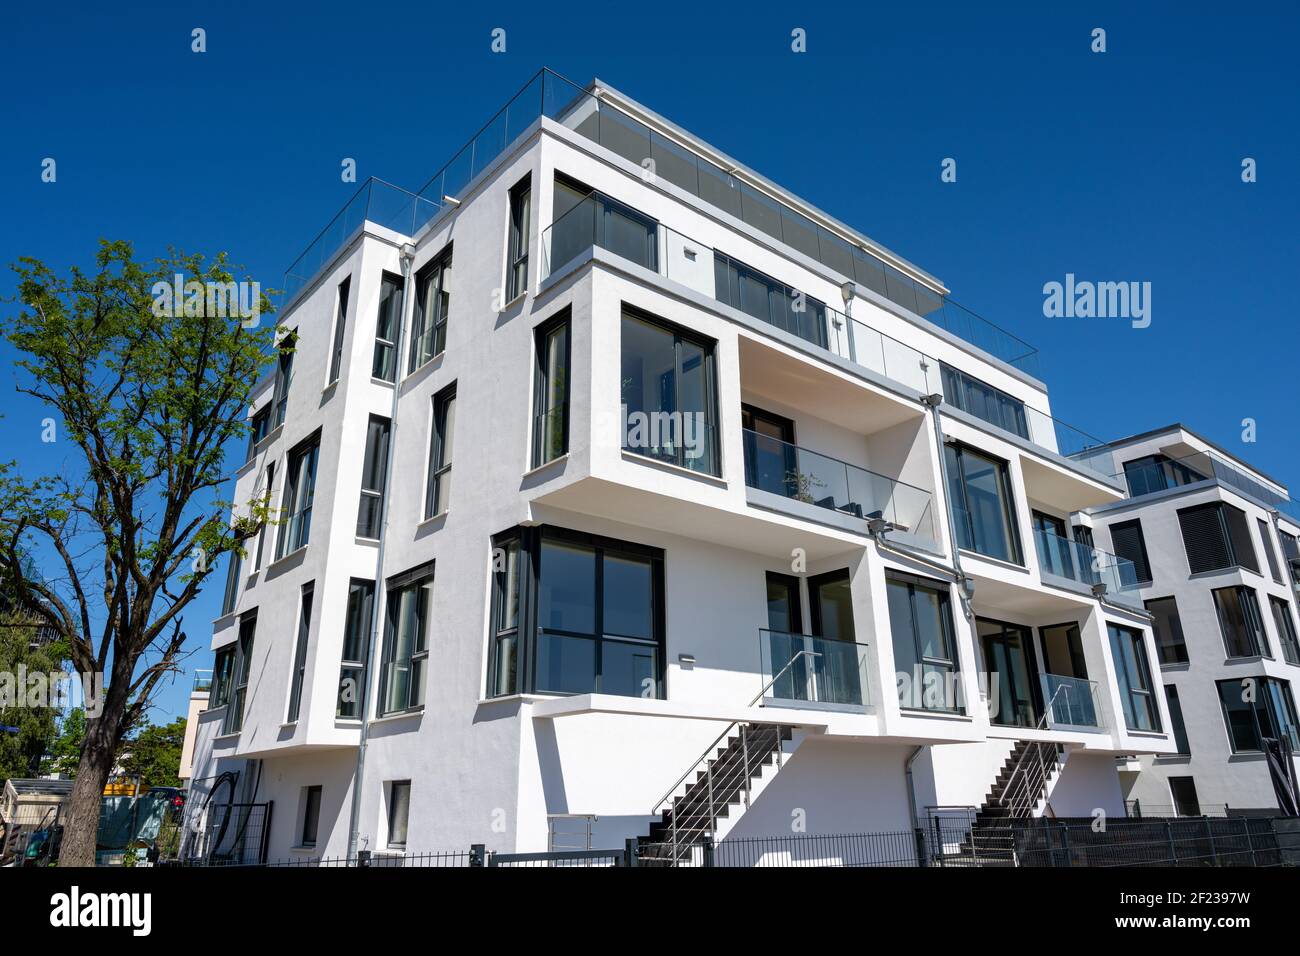 Modern white townhouses seen in Berlin, Germany Stock Photo